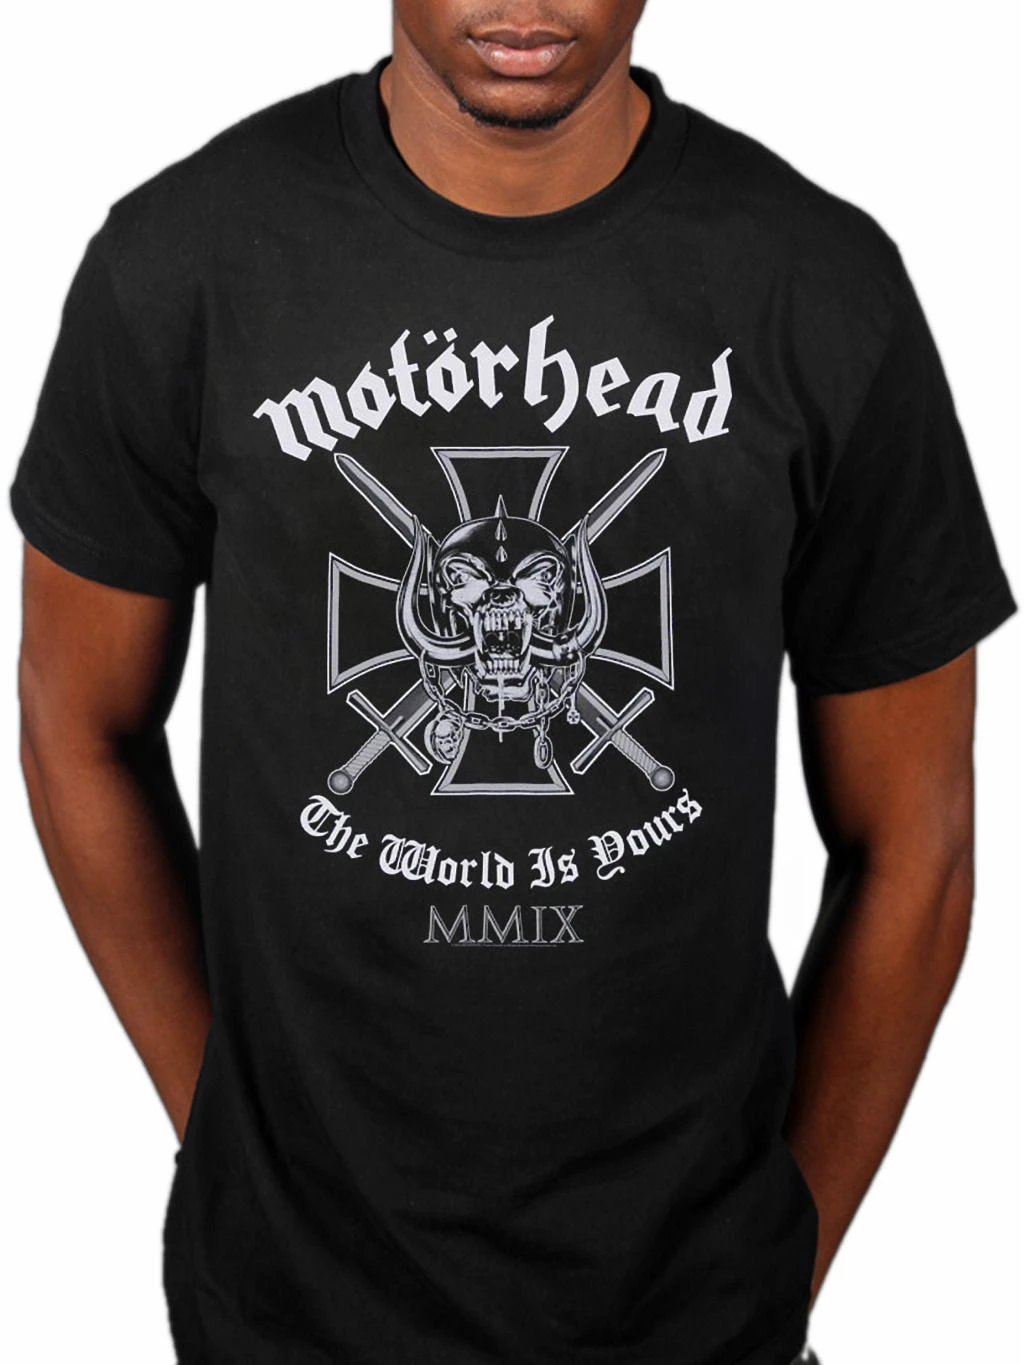 Oficial Motorhead Shiver Me Timbers Camiseta Overkill Bomber Ace Of Spades Punk